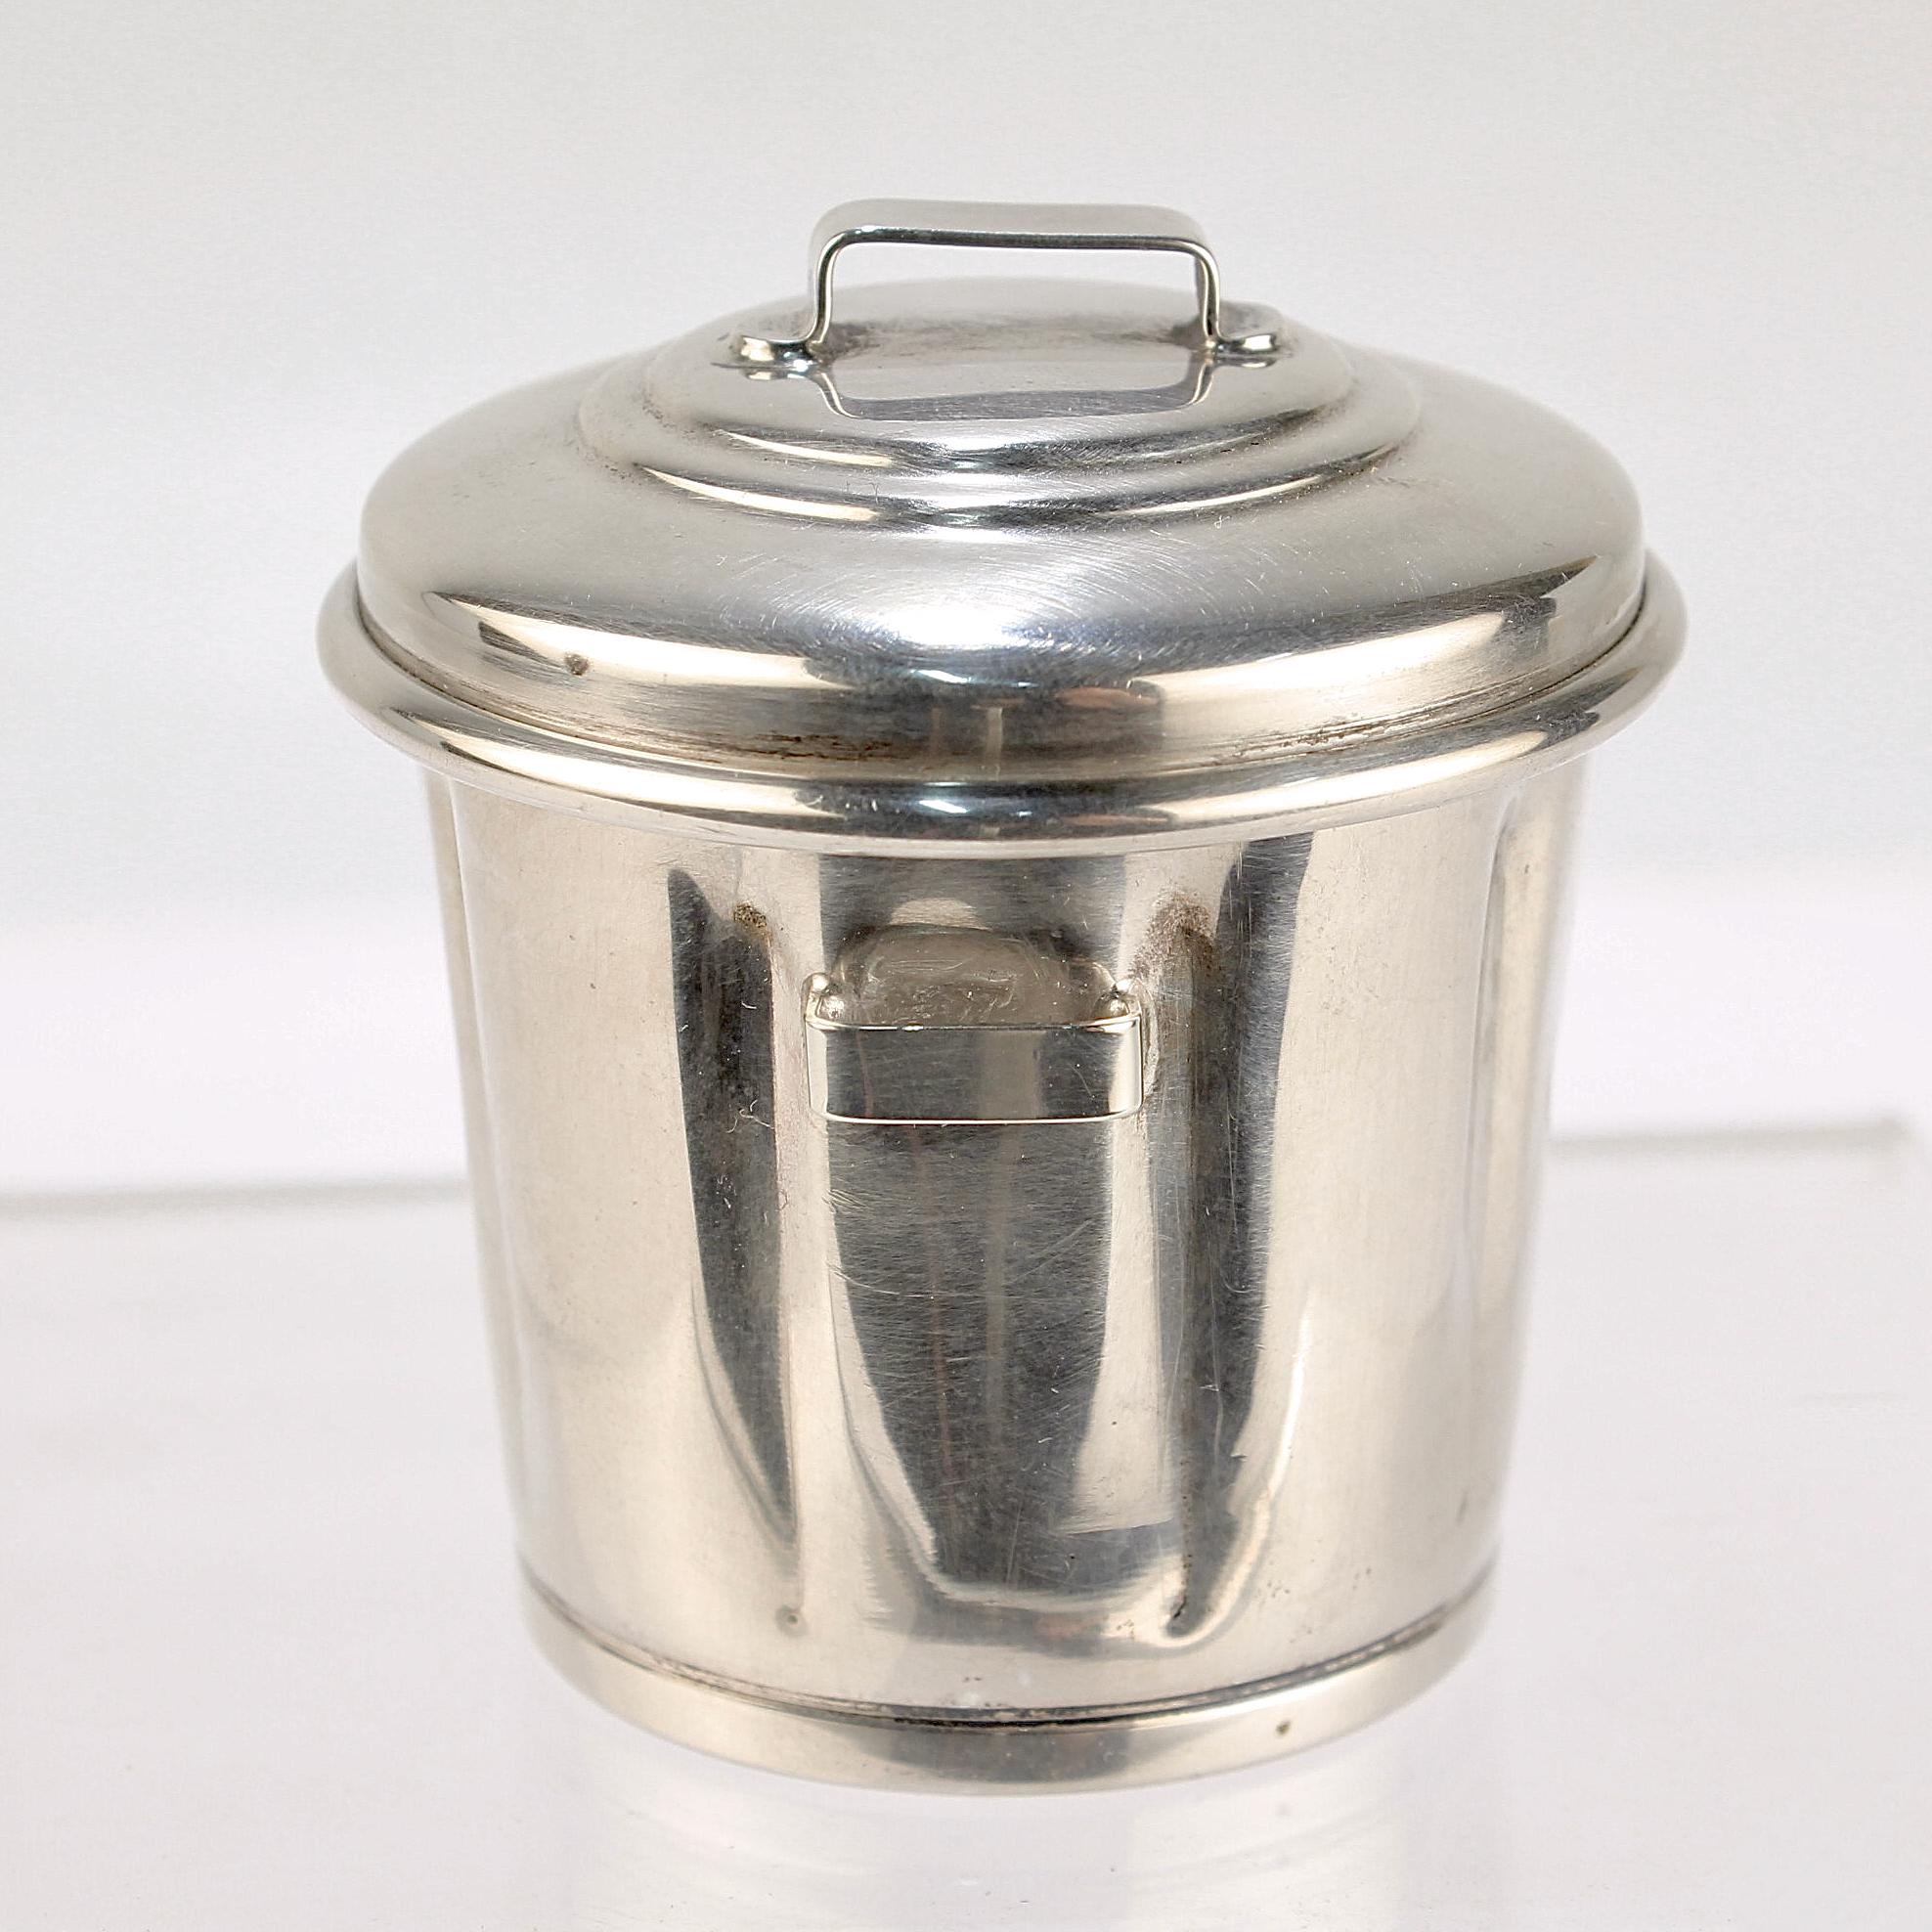 A fine sterling silver toothpick or cocktail spear holder in the form of a trash can.

Marked for Cartier.

Model no. 667. 

Simply a wonderful, whimsical accessory for the bar!

Date:
Mid-20th Century

Overall Condition:
It is in overall fair,